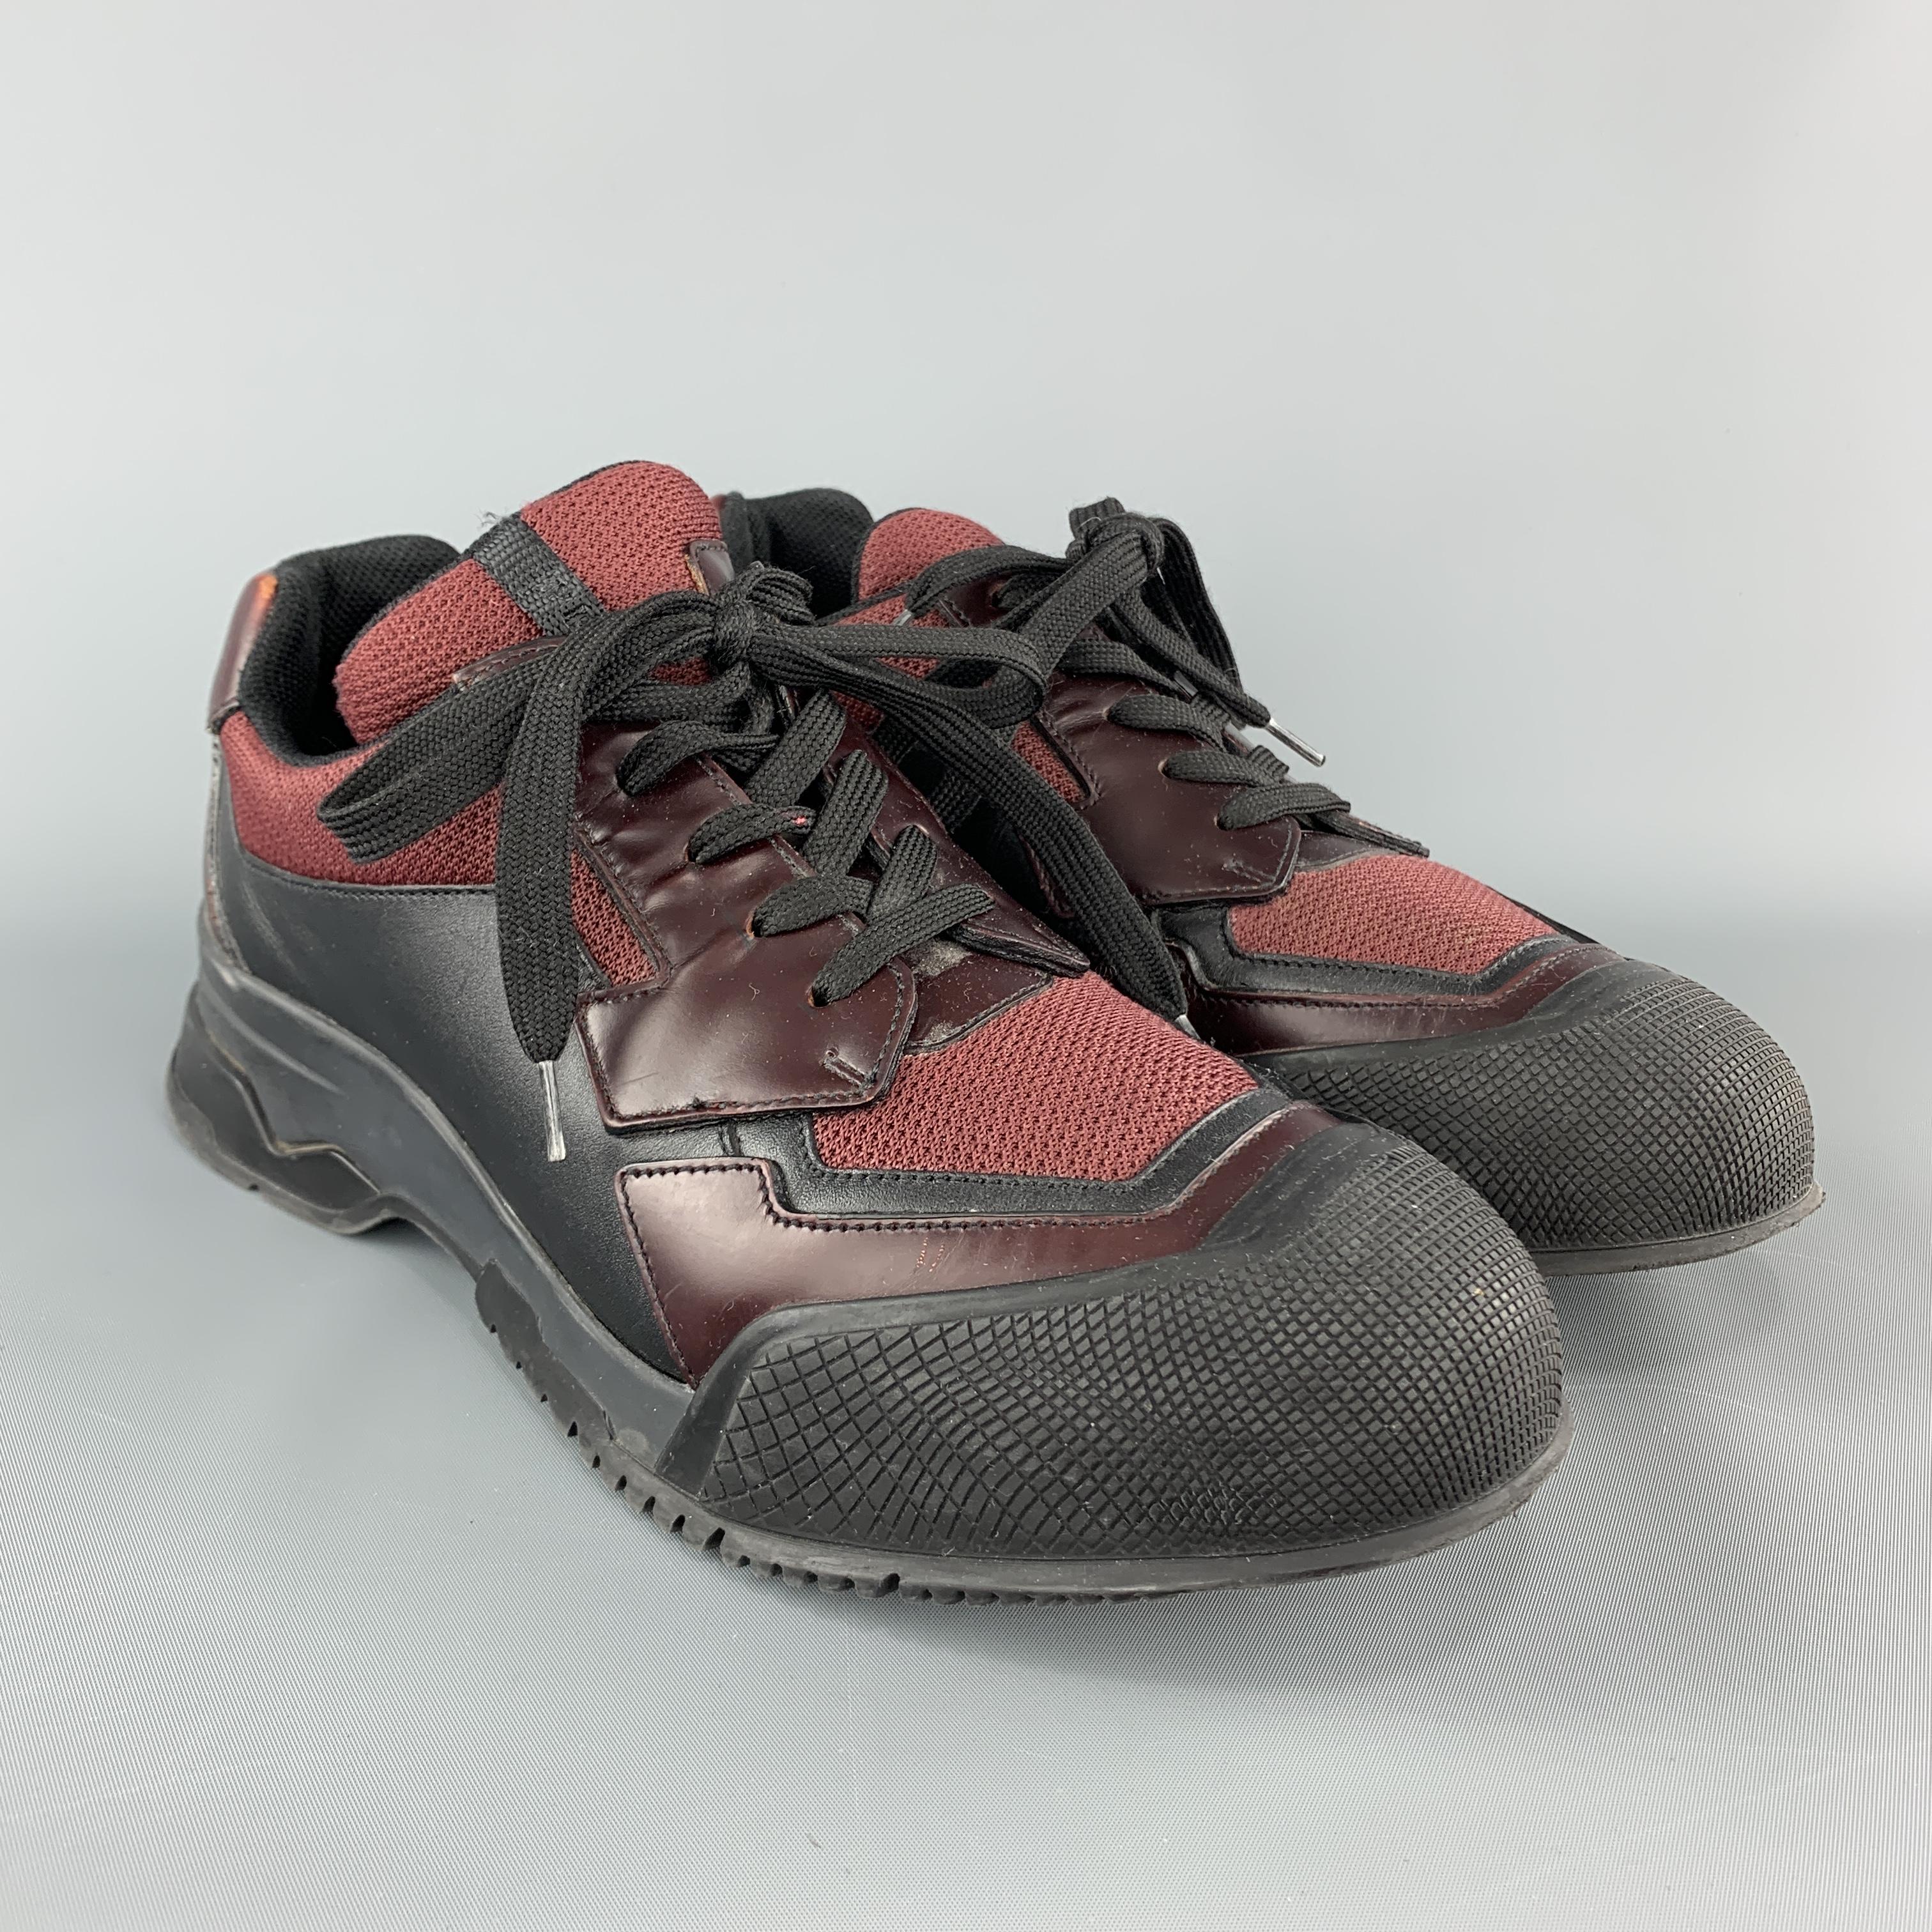 PRADA sneakers come in burgundy mesh with black and burgundy leather panels, and chunky rubber toe cap sole. Made in Italy.

Very Good Pre-Owned Condition.
Marked: UK 7.5

Outsole: 12 x 4.45 in.